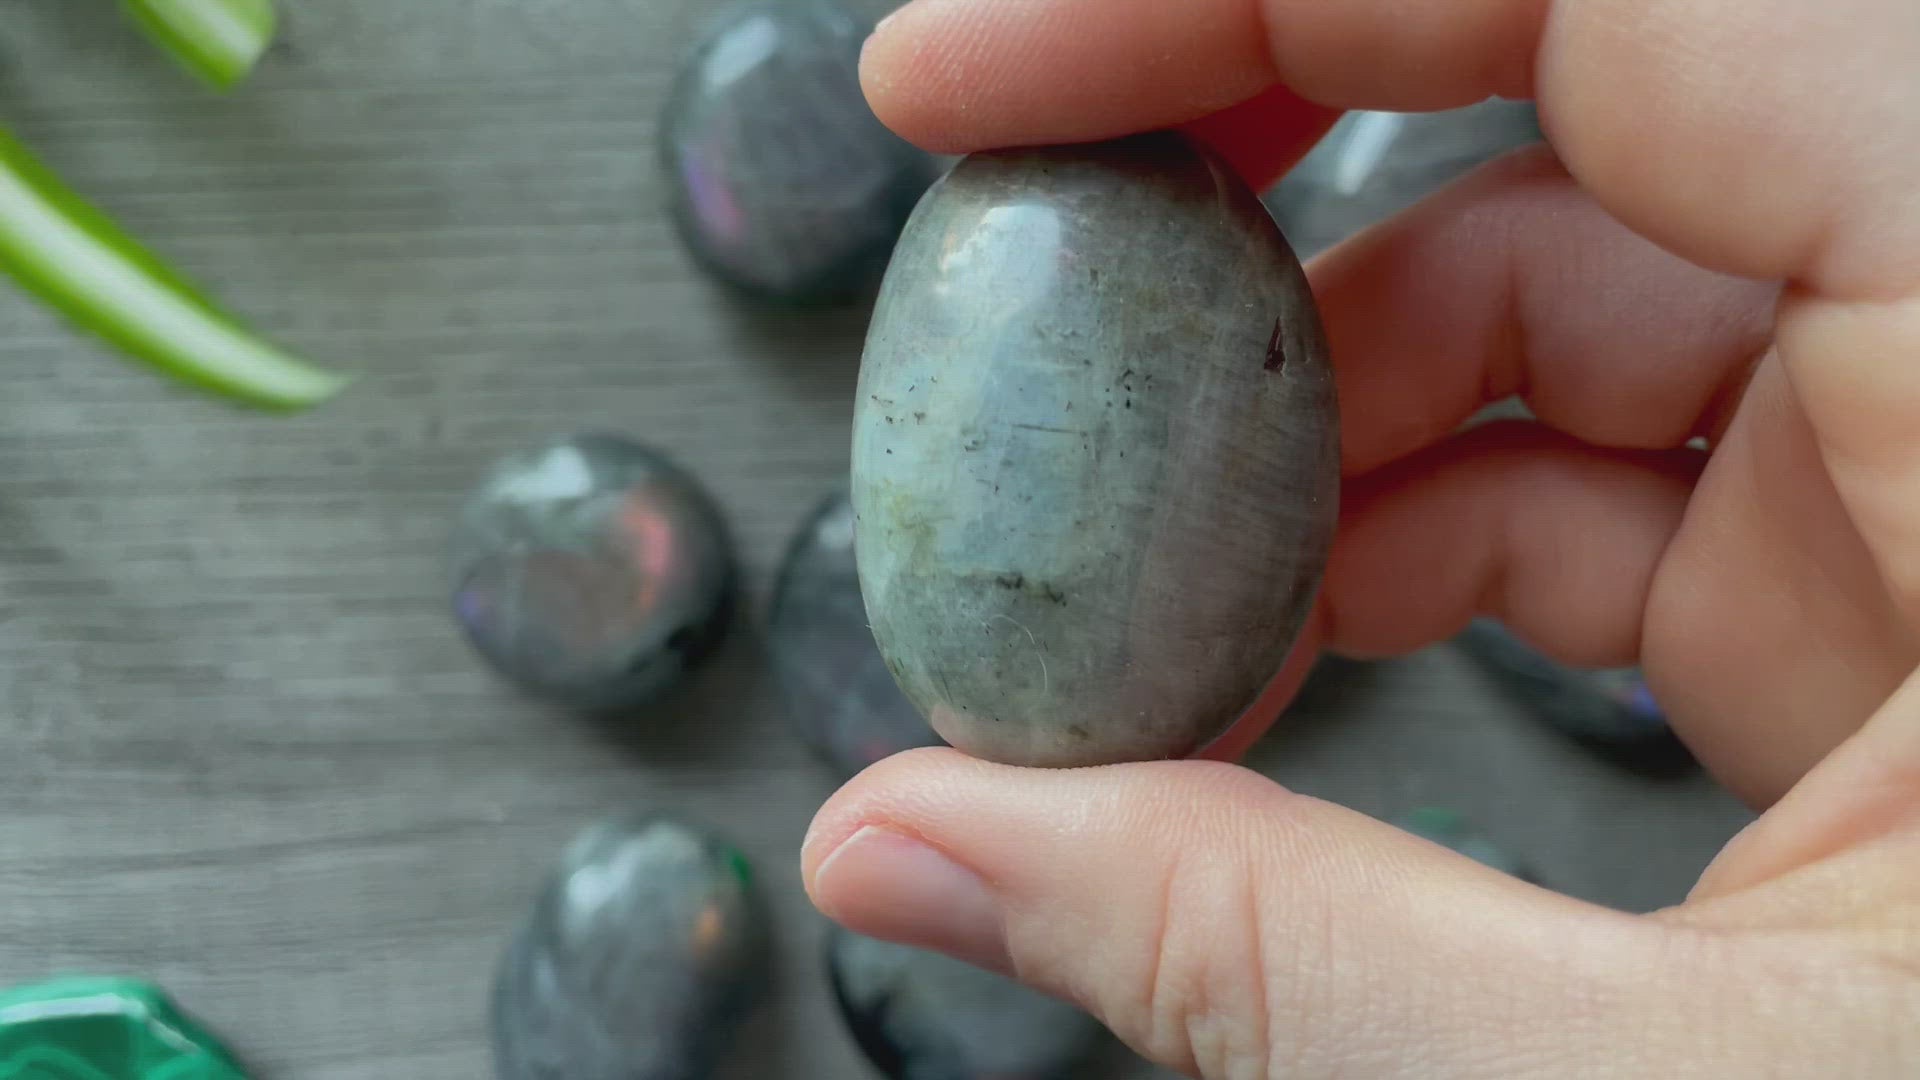 Pictured are various polished labradorite palm stones.